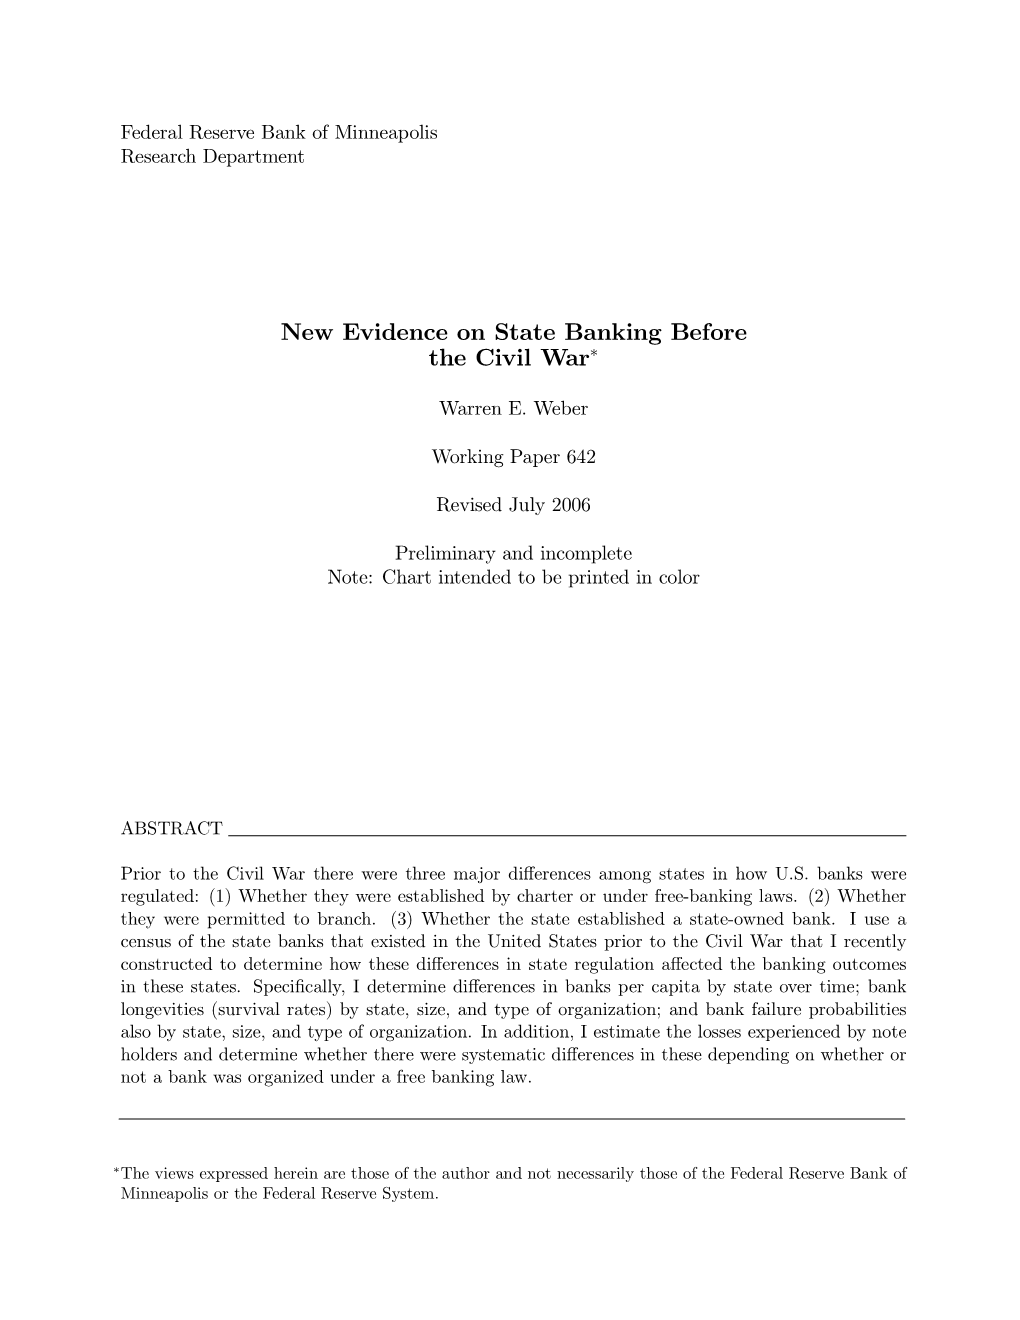 New Evidence on State Banking Before the Civil War∗